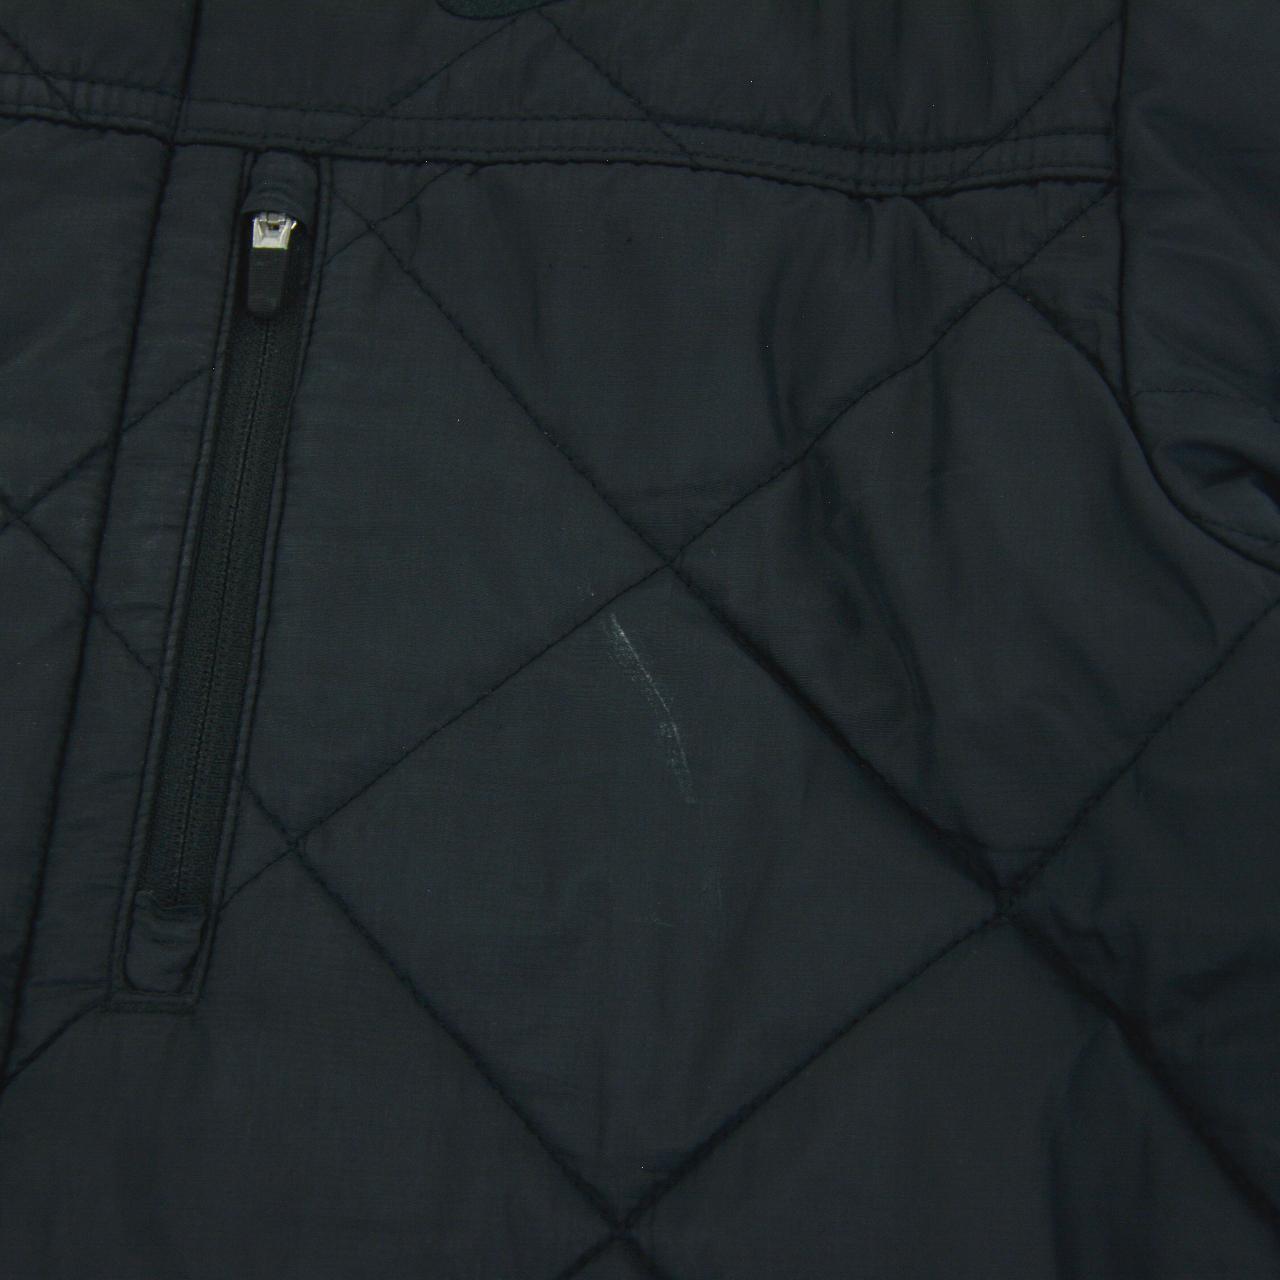 Vintage Nike Quilted Jacket Size M - Known Source